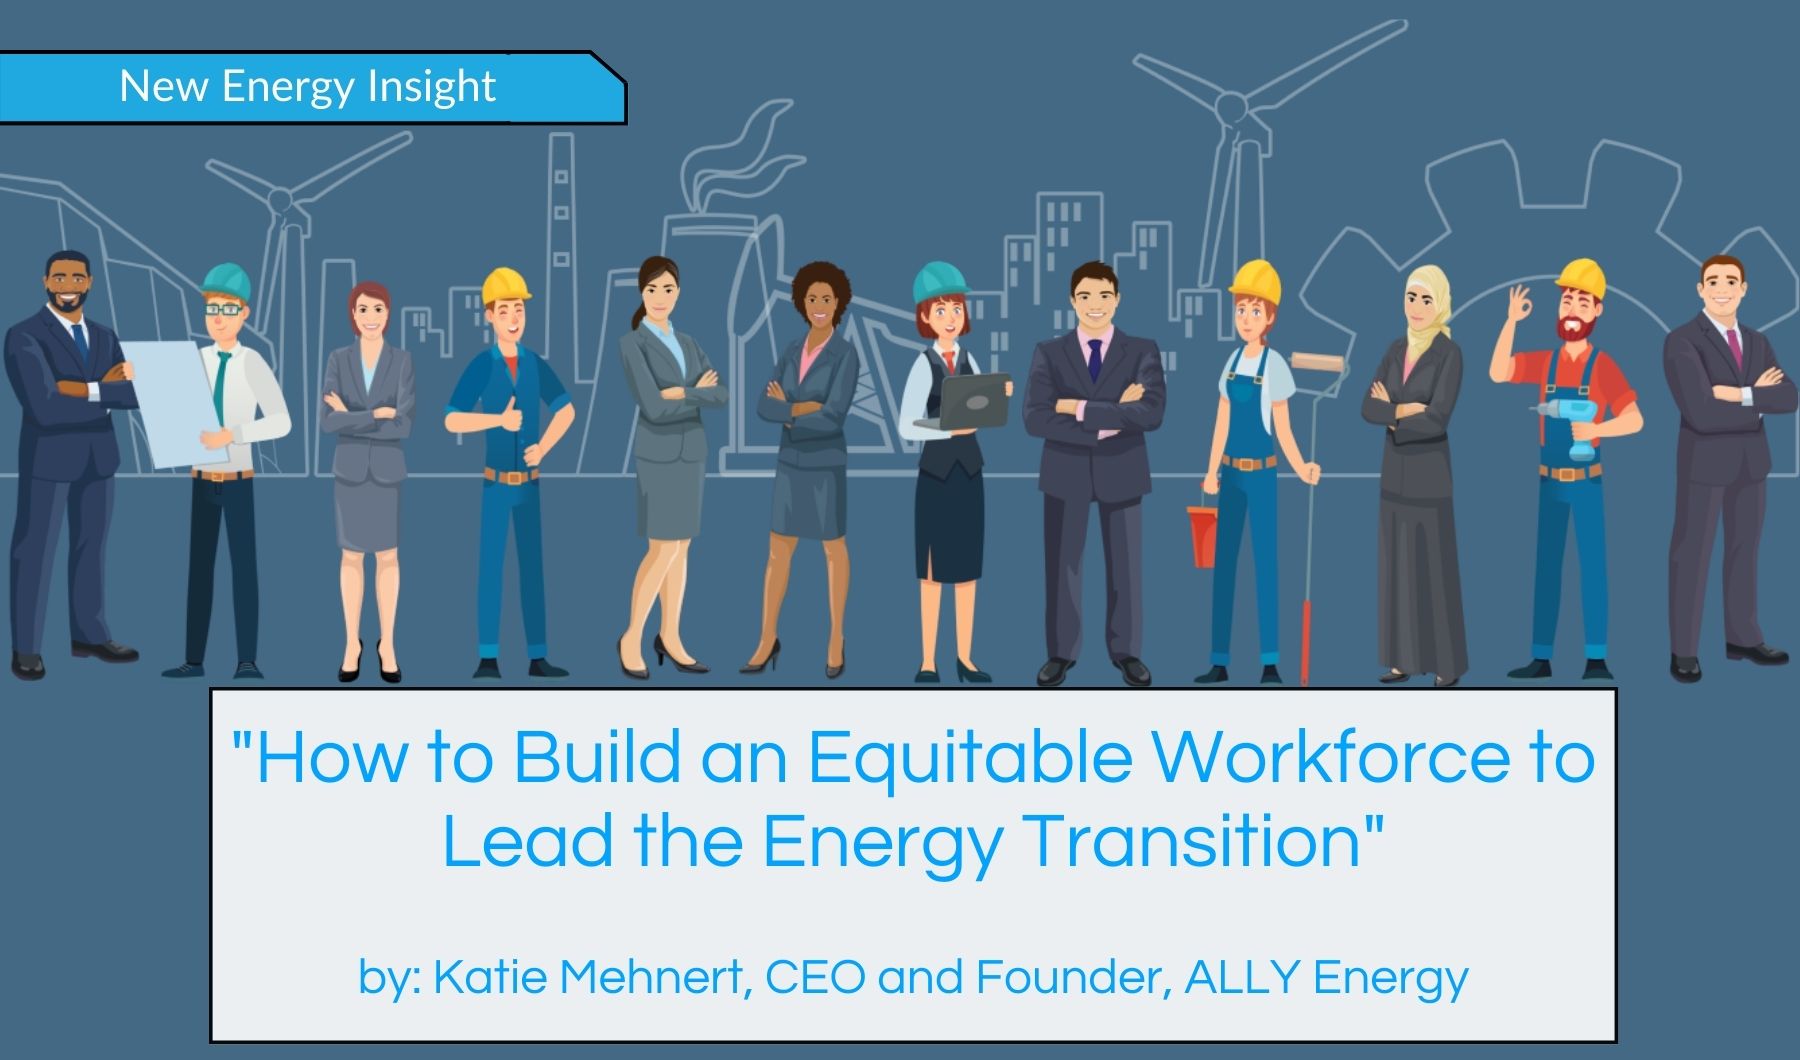 How to Build an Equitable Workforce to Lead the Energy Transition